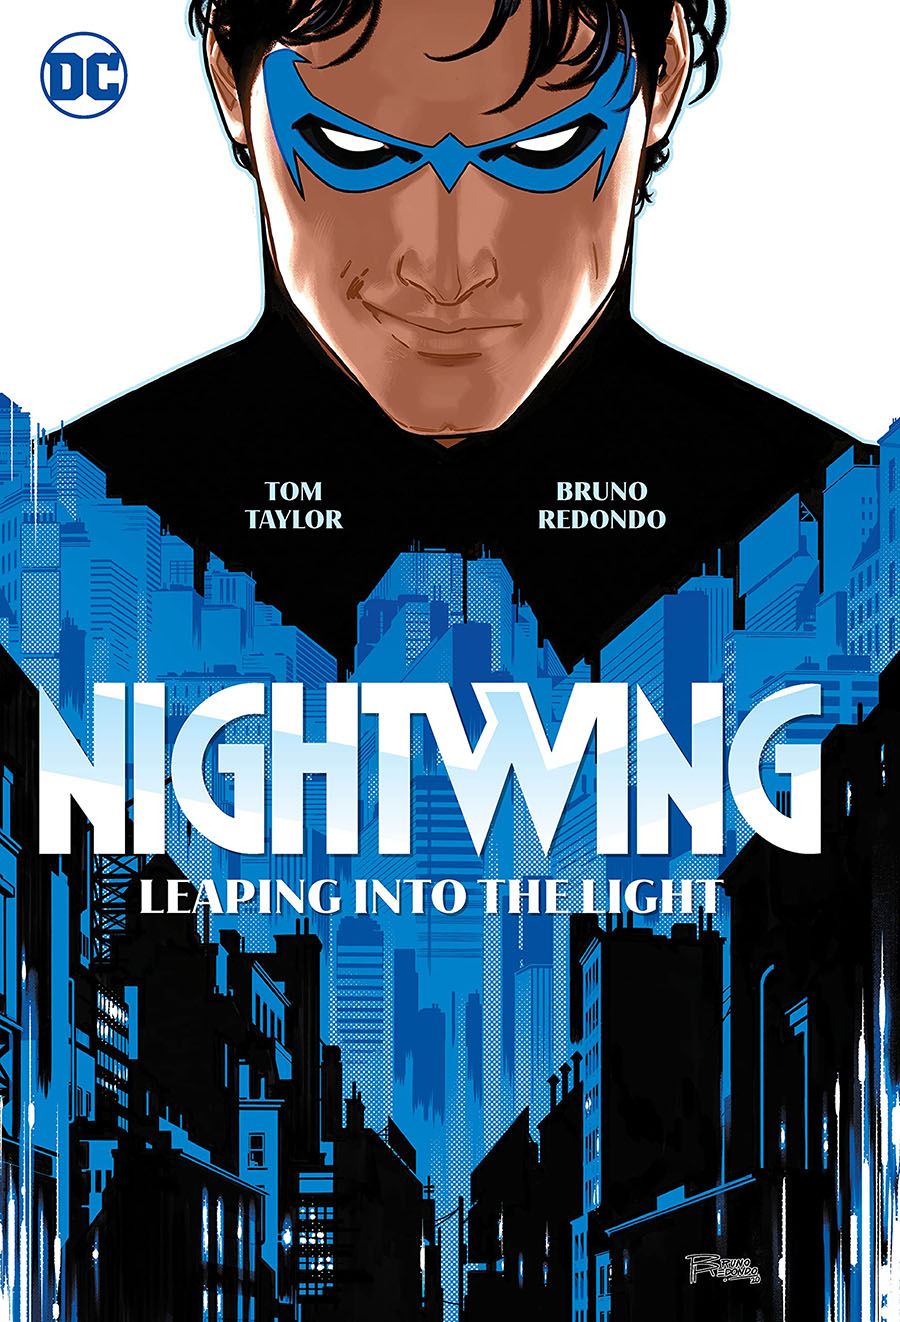 Nightwing (2021) Vol 1 Leaping Into The Light HC